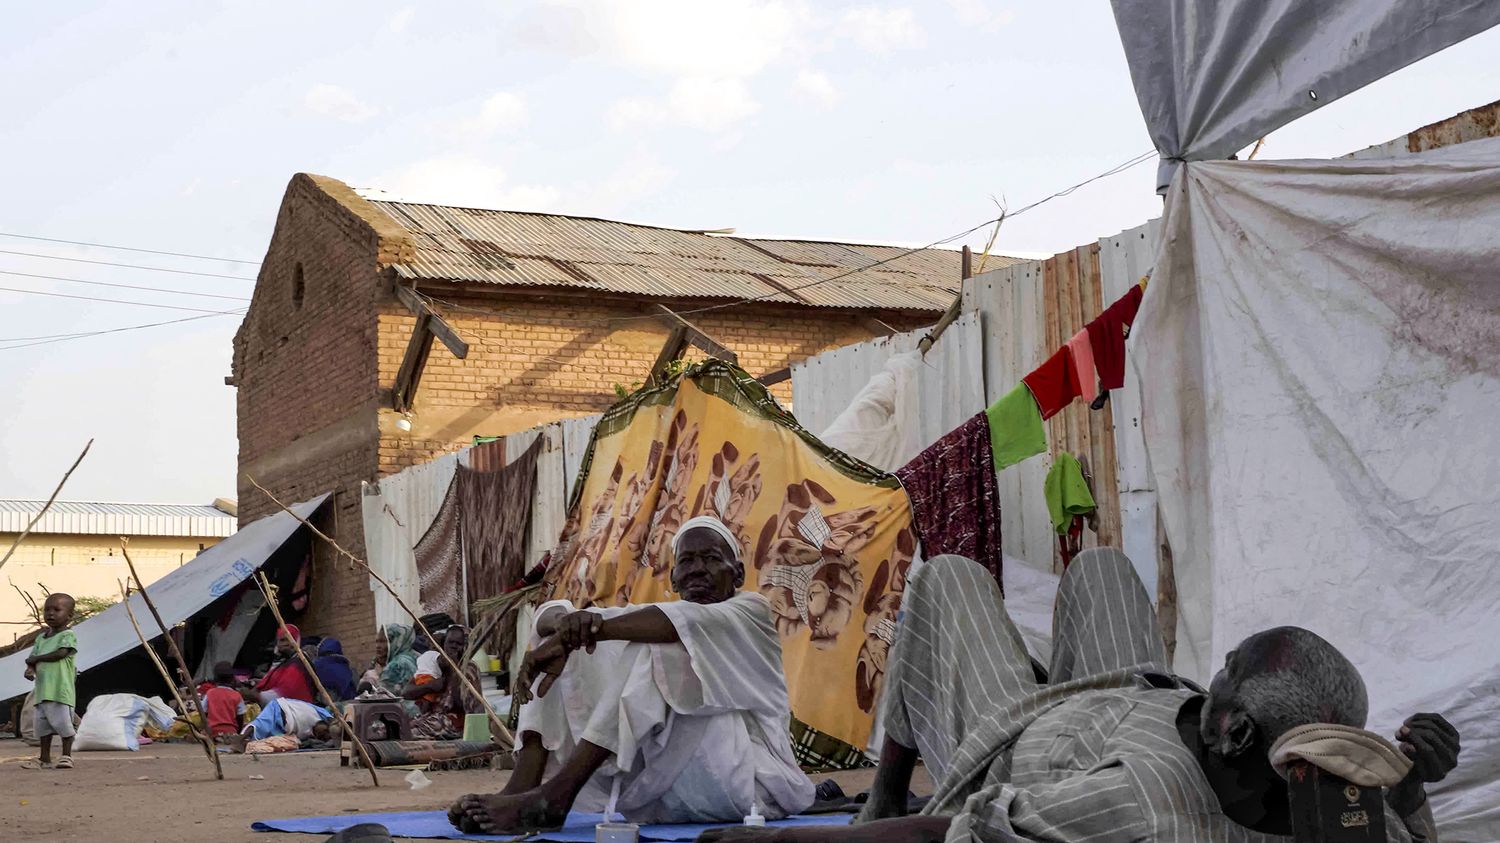 Sudan: more than 3 million people displaced and refugees because of the war, announces the UN
